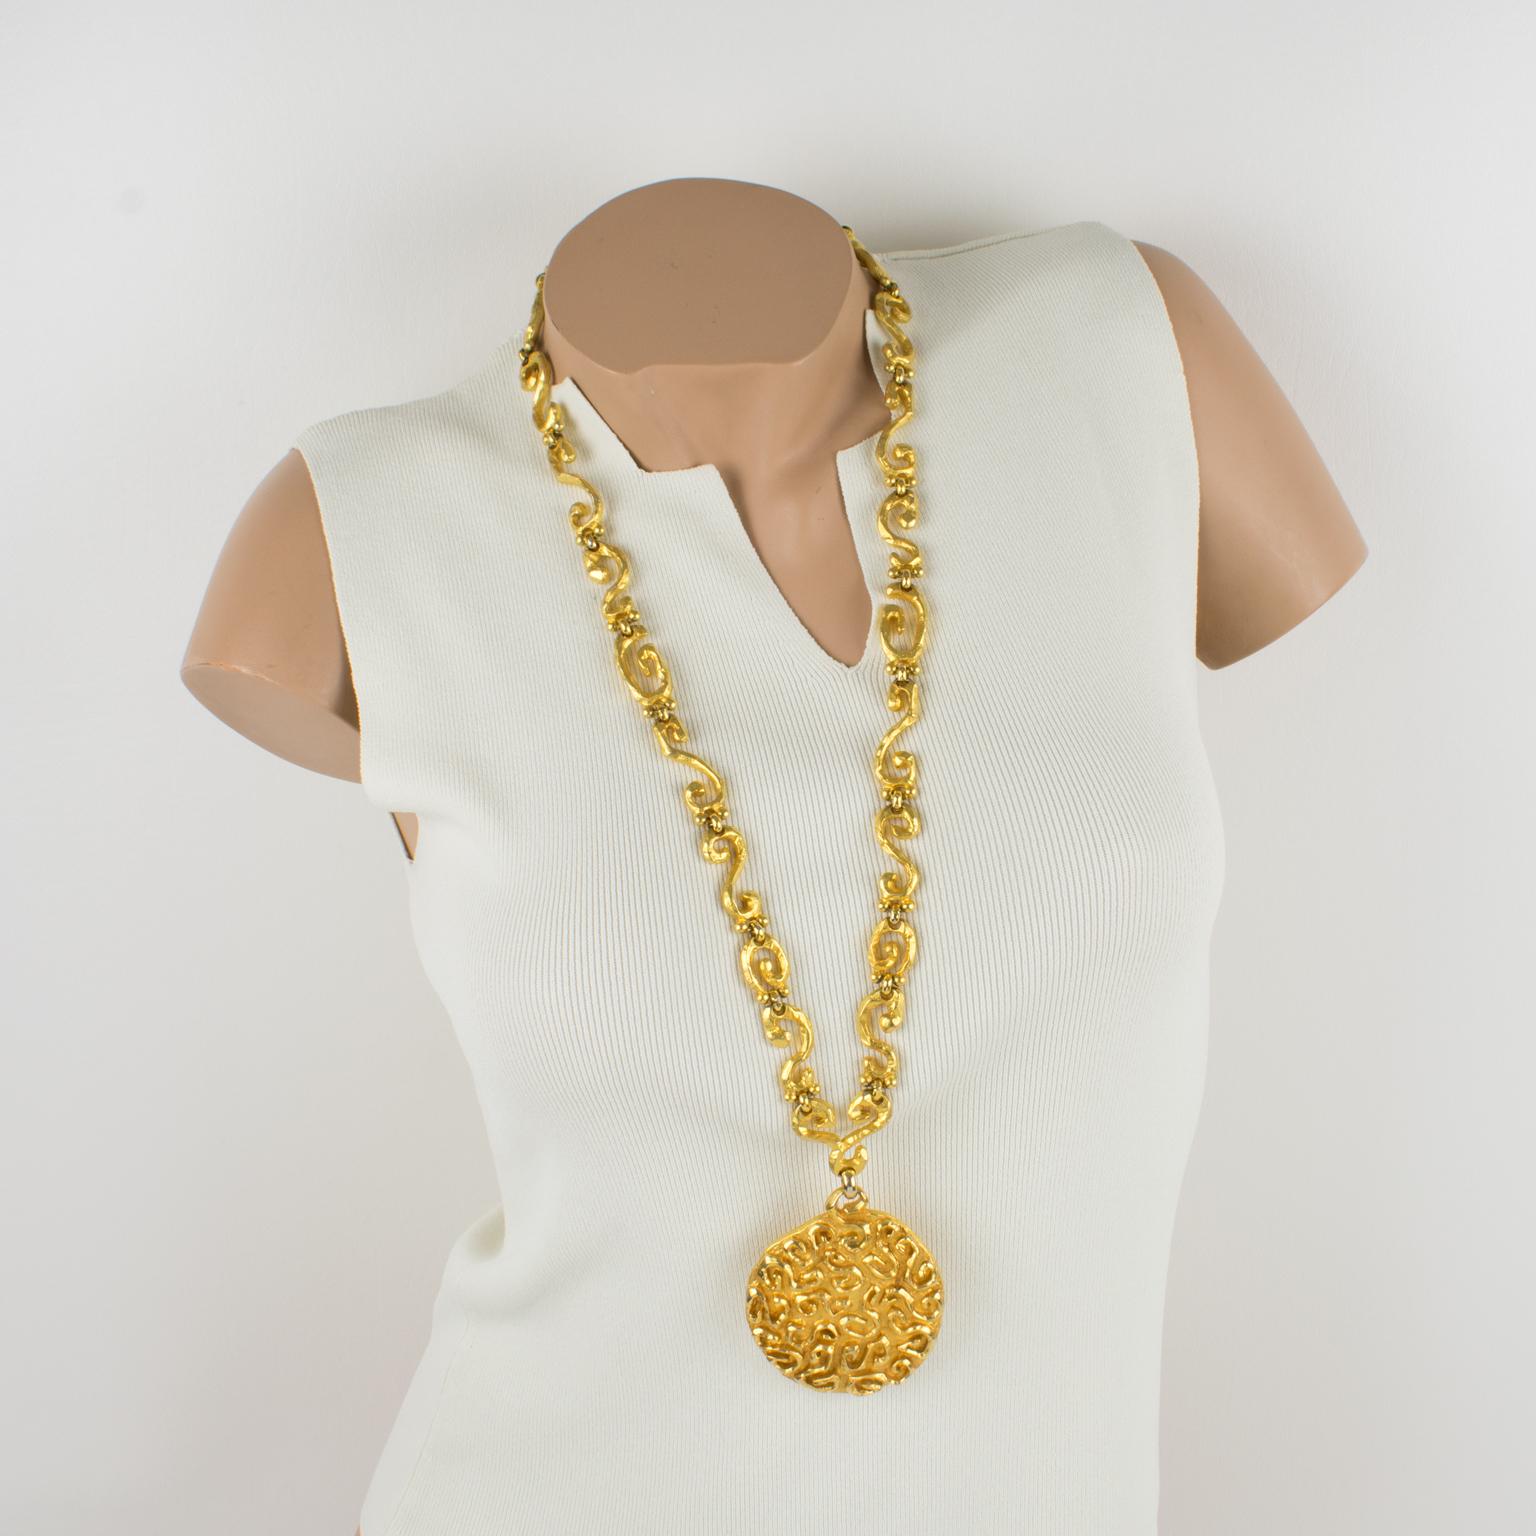 This stunning extra-long Edouard Rambaud Paris medallion necklace was a Byzantine revival-inspired design. The gilded metal heavy worked chain is all carved and textured with a satin finish and ornate with an impressive round pendant medallion with